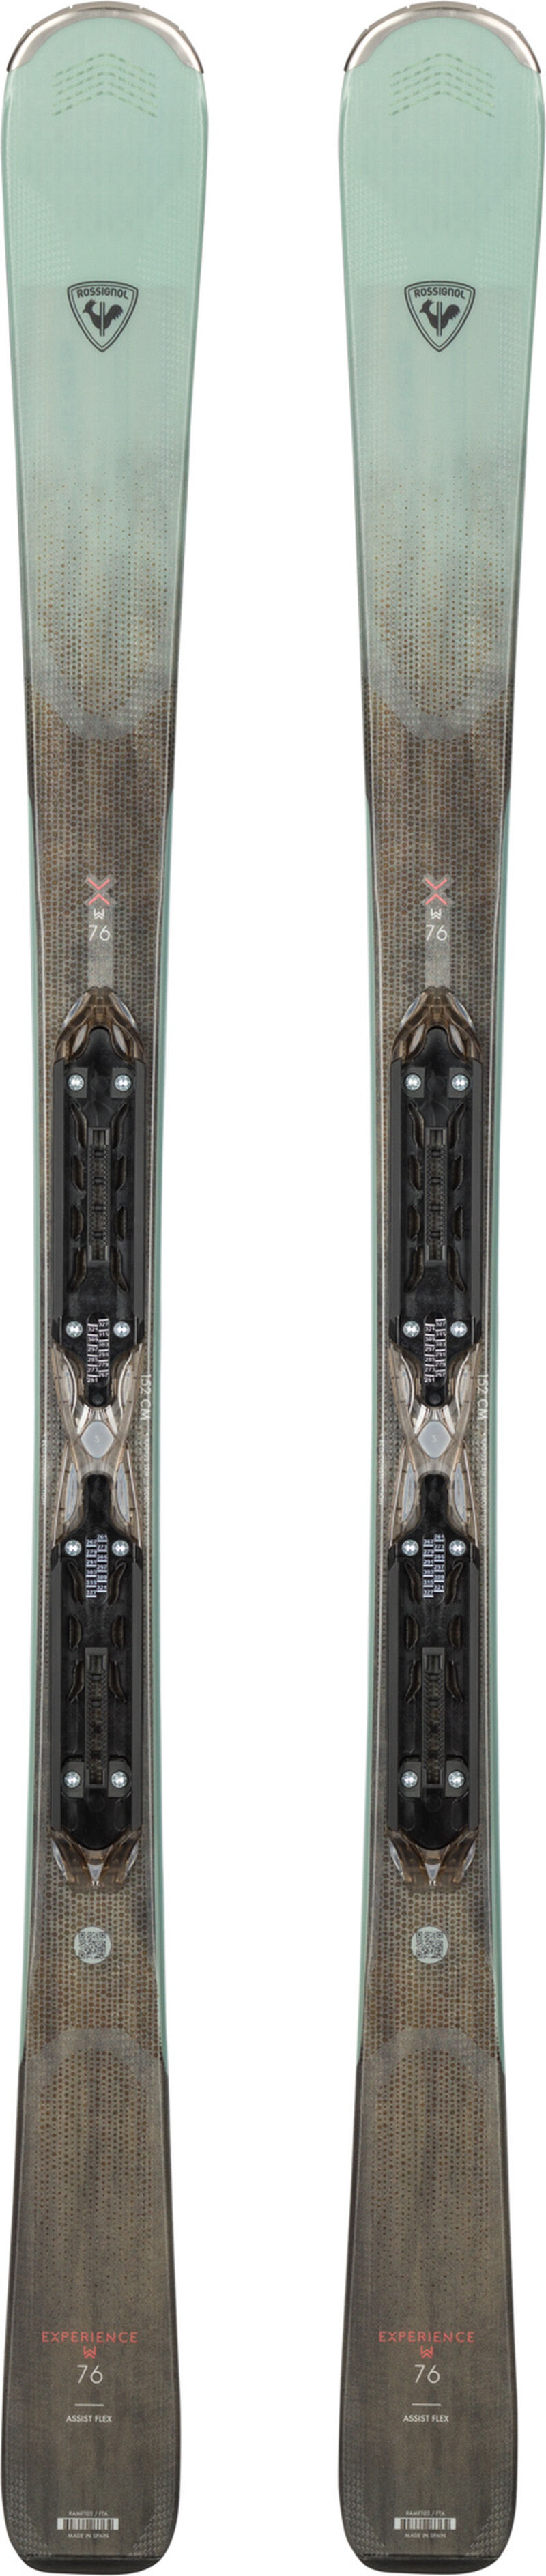 Skis All Mountain femme EXPERIENCE W 76 (XPRESS)